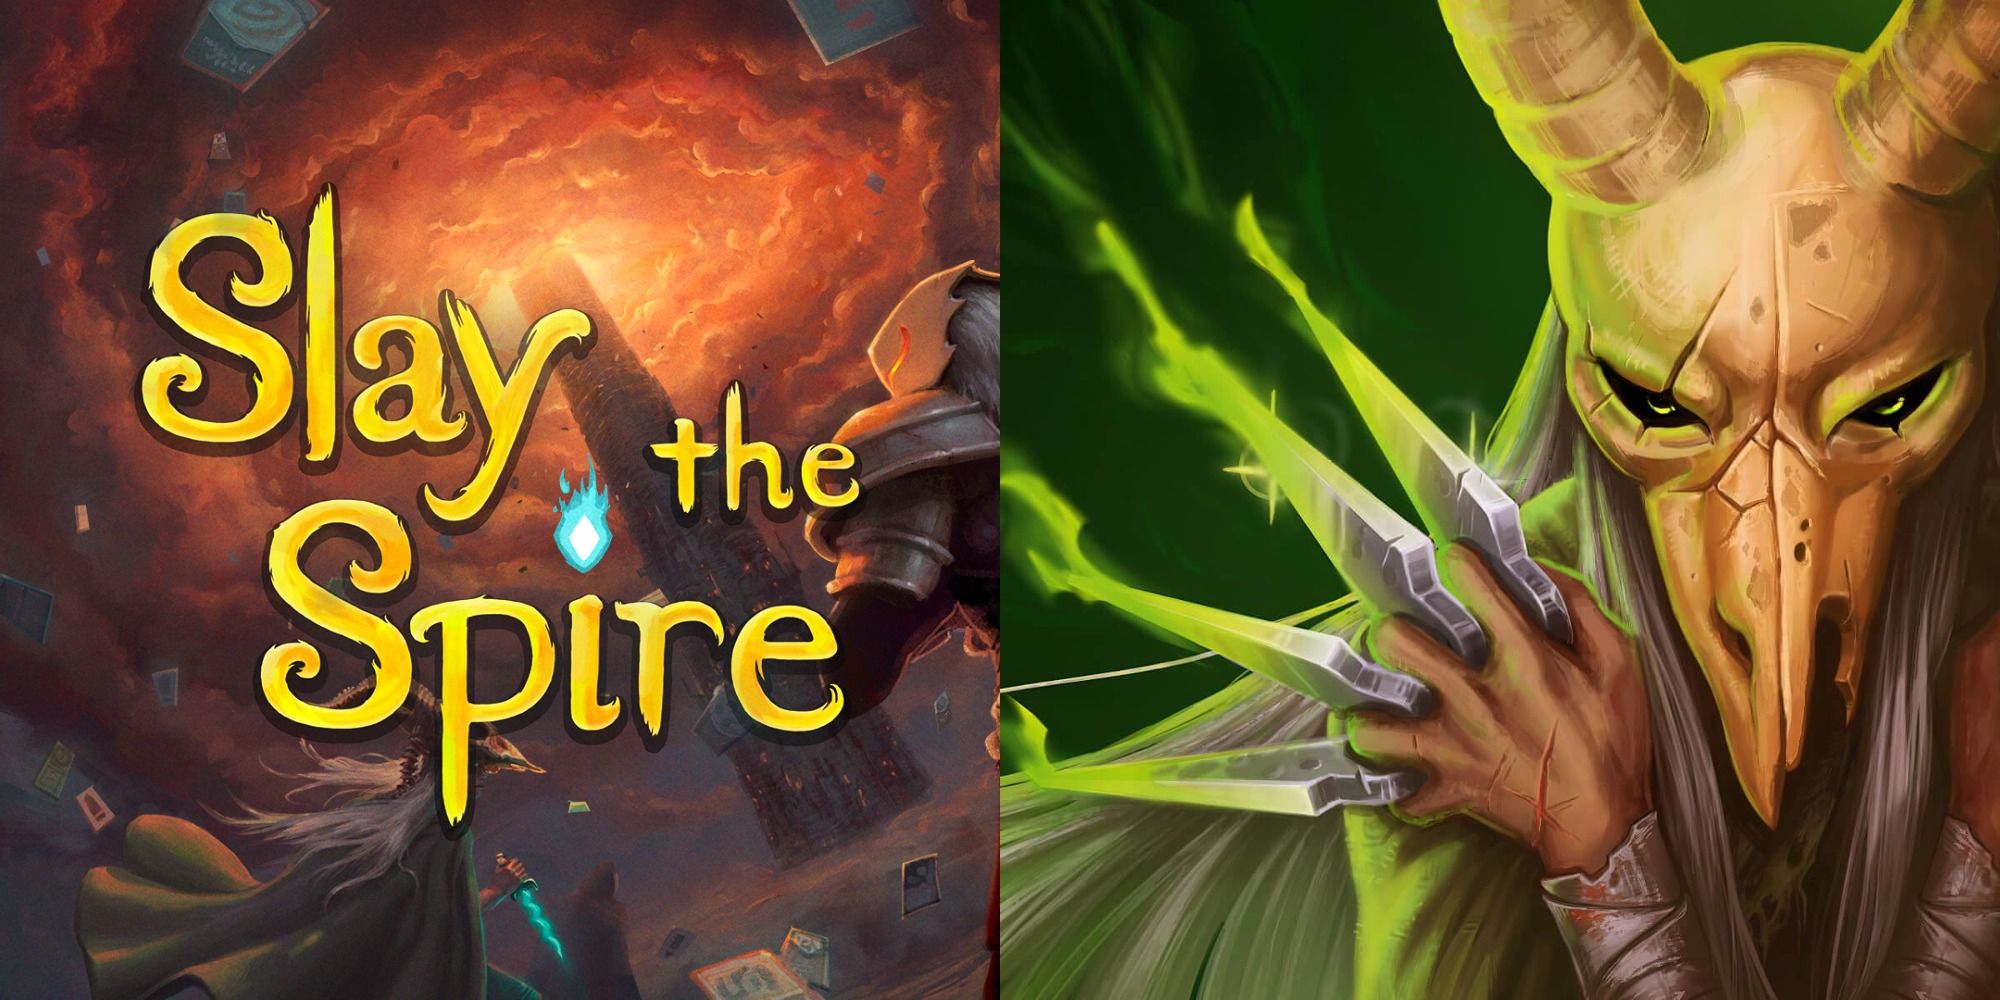 Split image showing the logo to Slay the Spire and the Silent character.